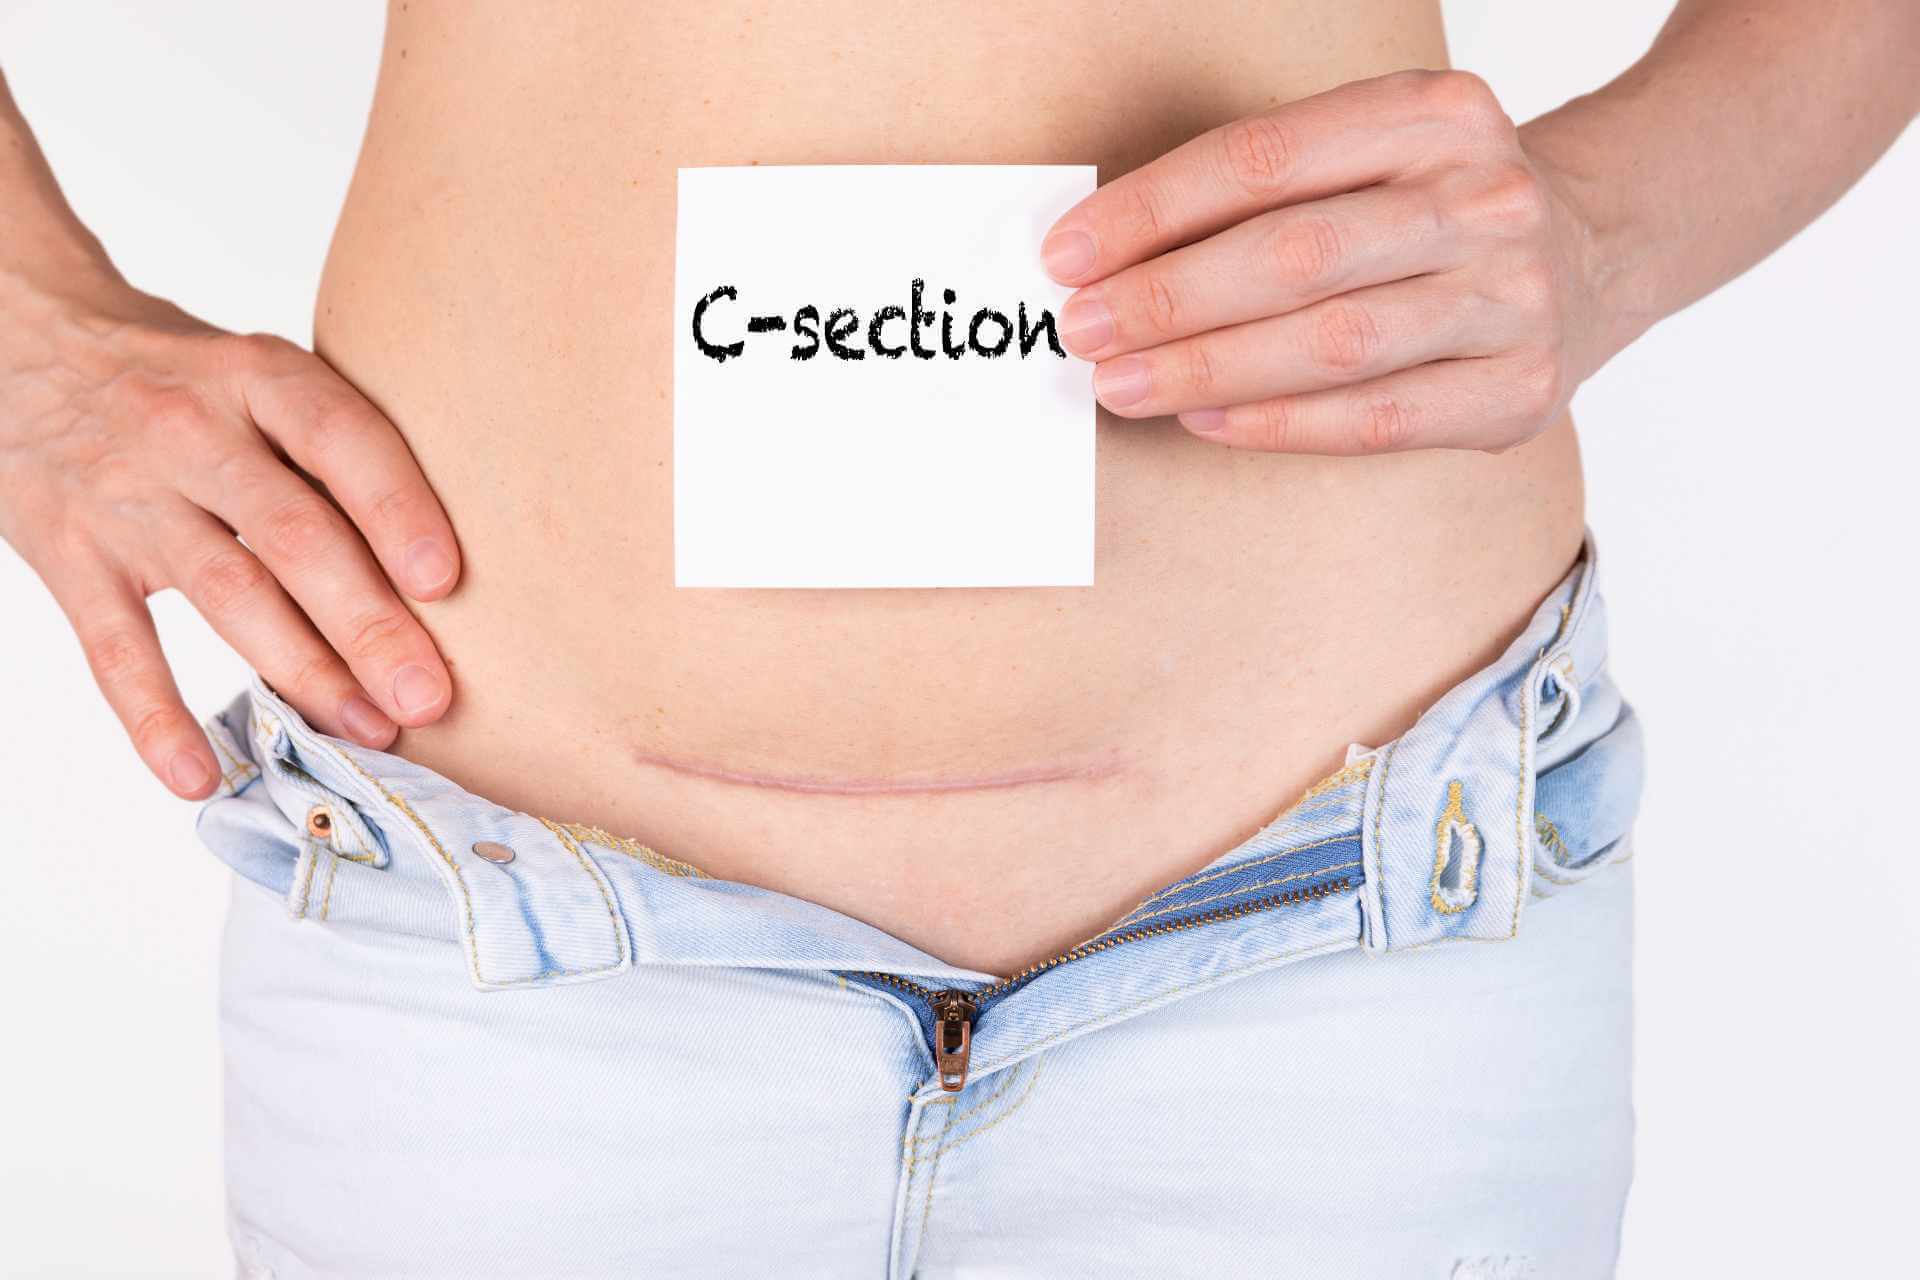 Does IVF Increase Chance of C Section?